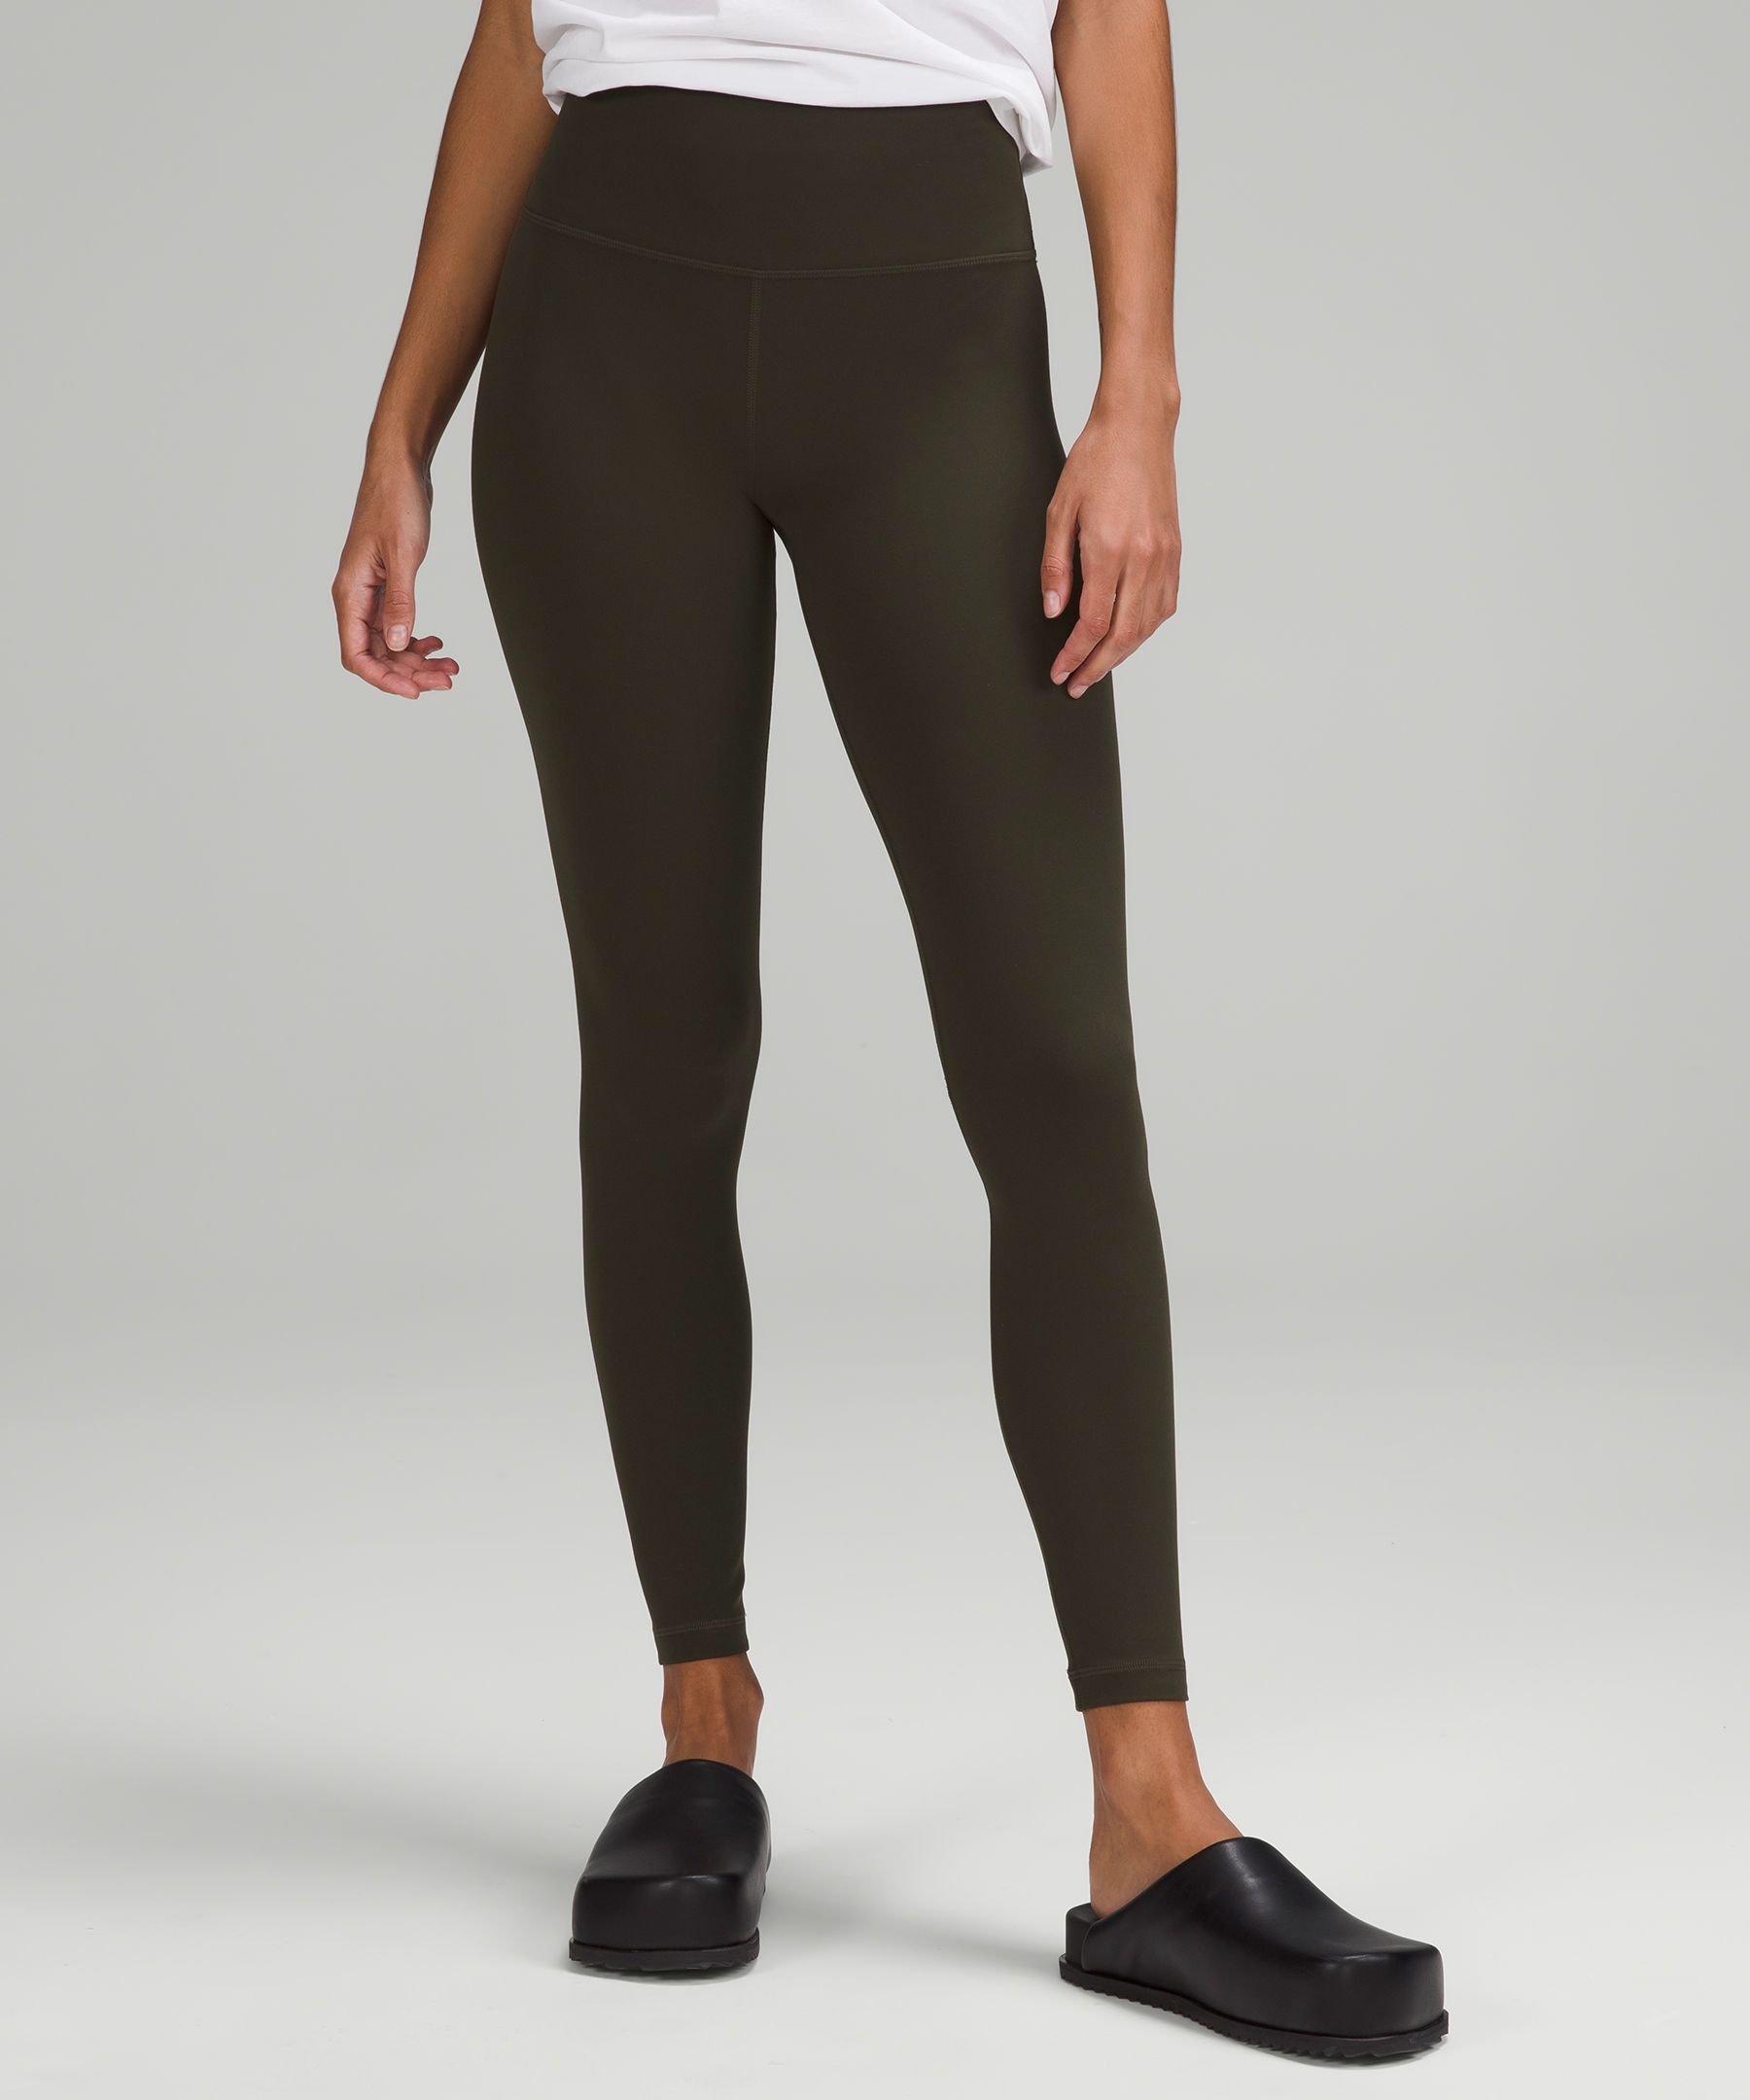 Which Dark Olive color is more accurate? Same legging, just diff